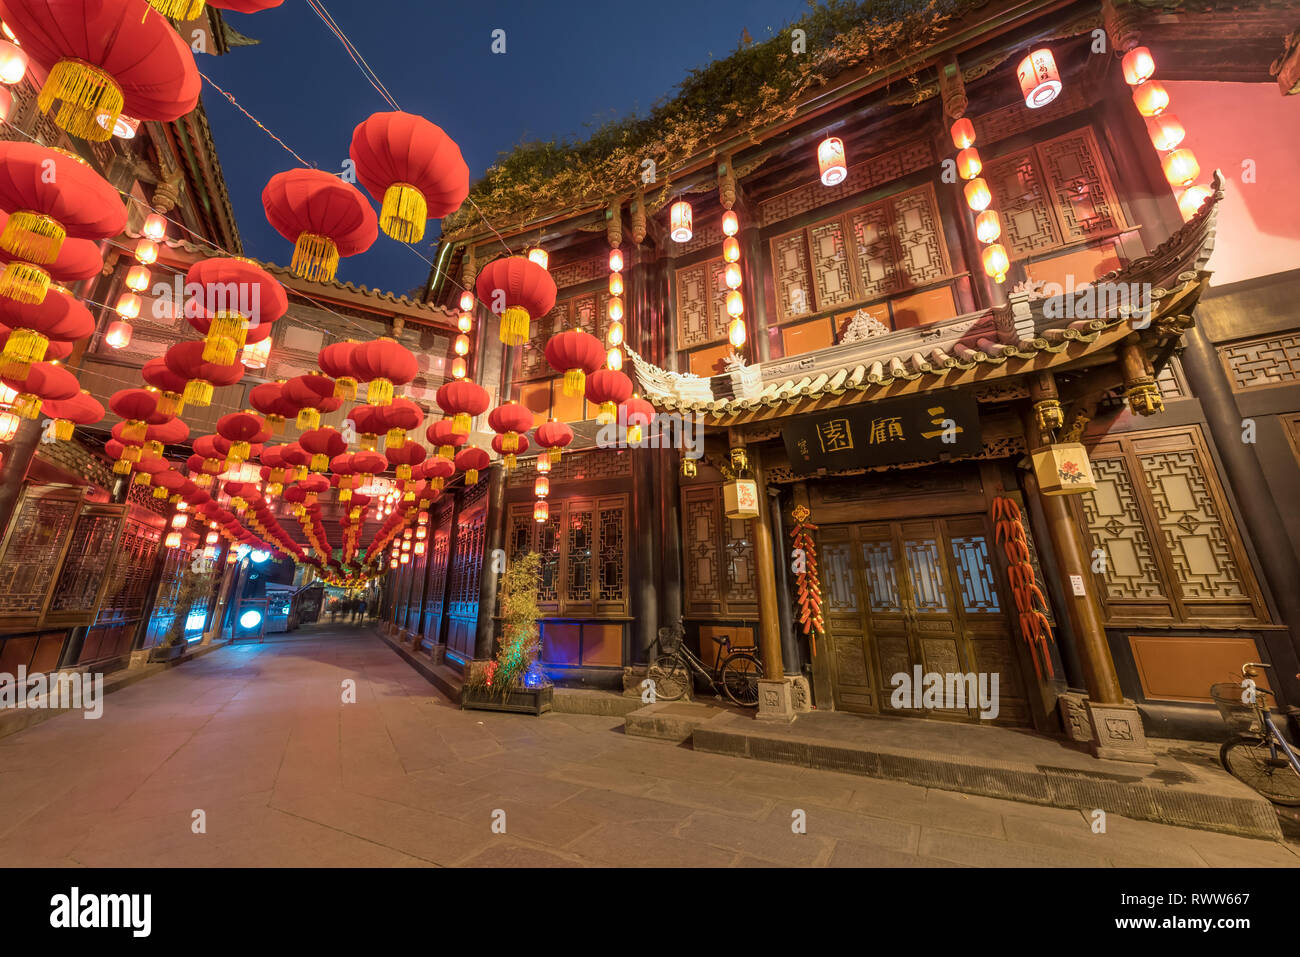 Chengdu, Sichuan province, China - Jan 26, 2016 : Jinli street famous touristic area during the chinese new year Stock Photo